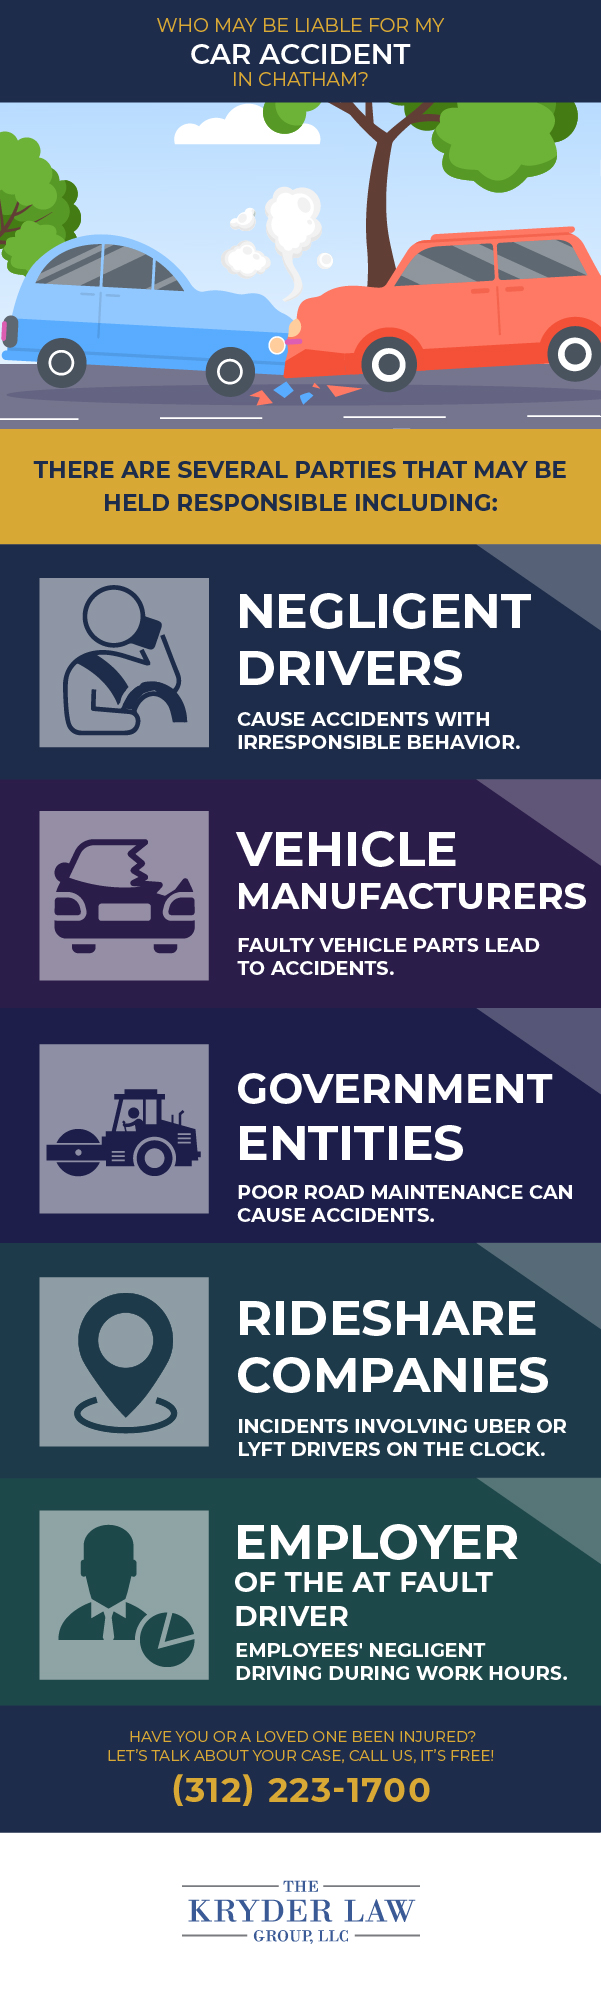 Who May Be Liable for My Car Accident Infographic